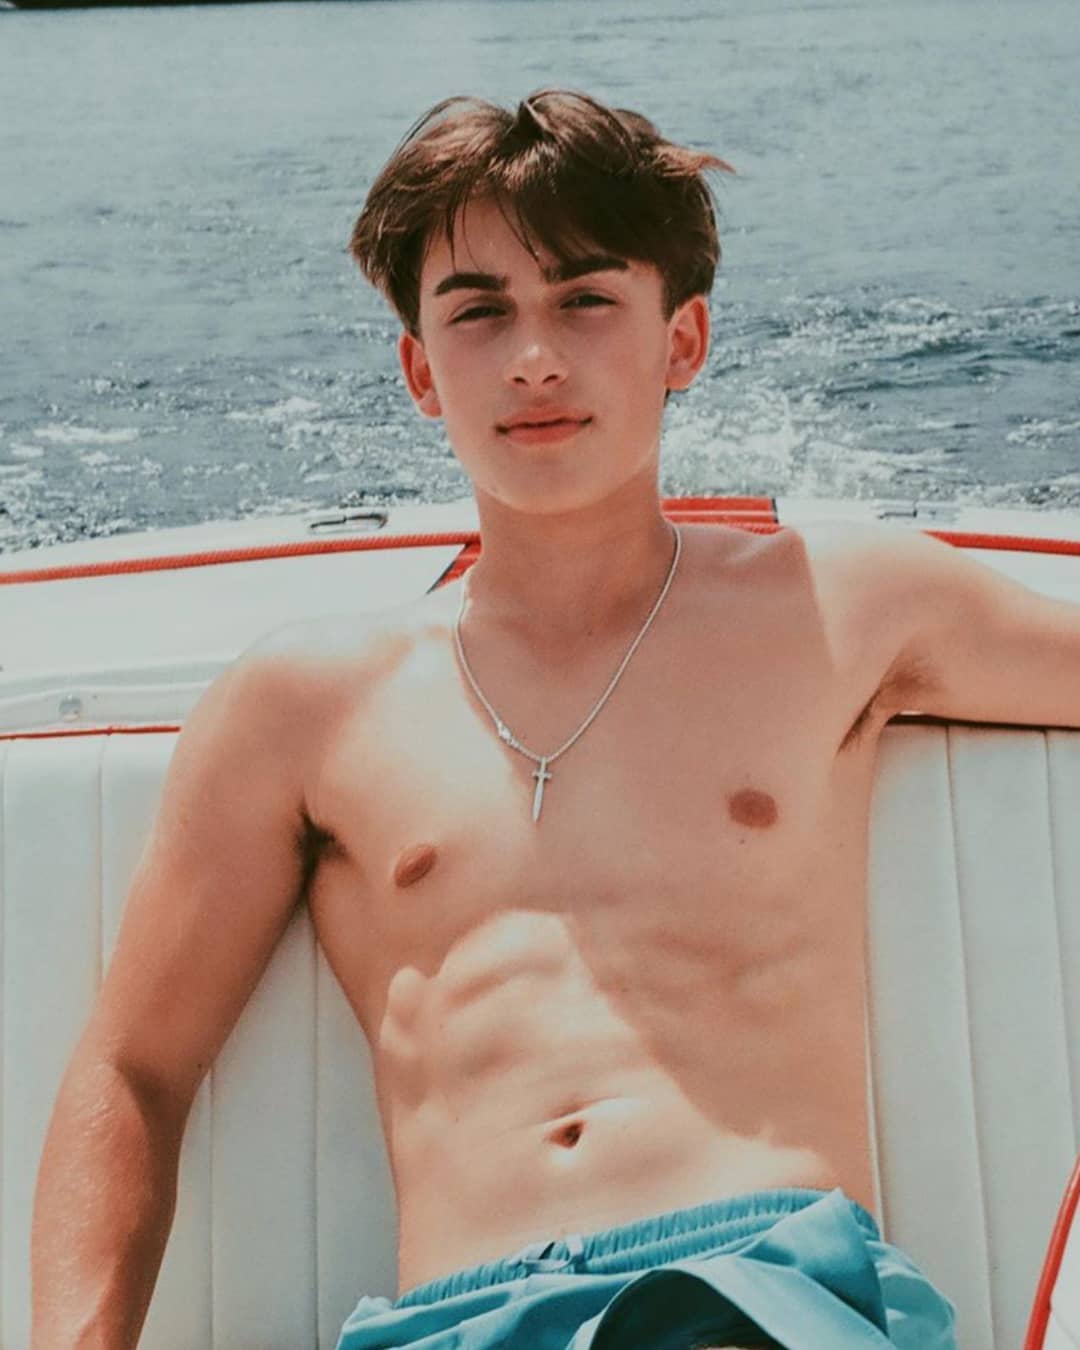 Picture Of Johnny Orlando In General Pictures Johnny Orlando 1623370653 Teen Idols 4 You